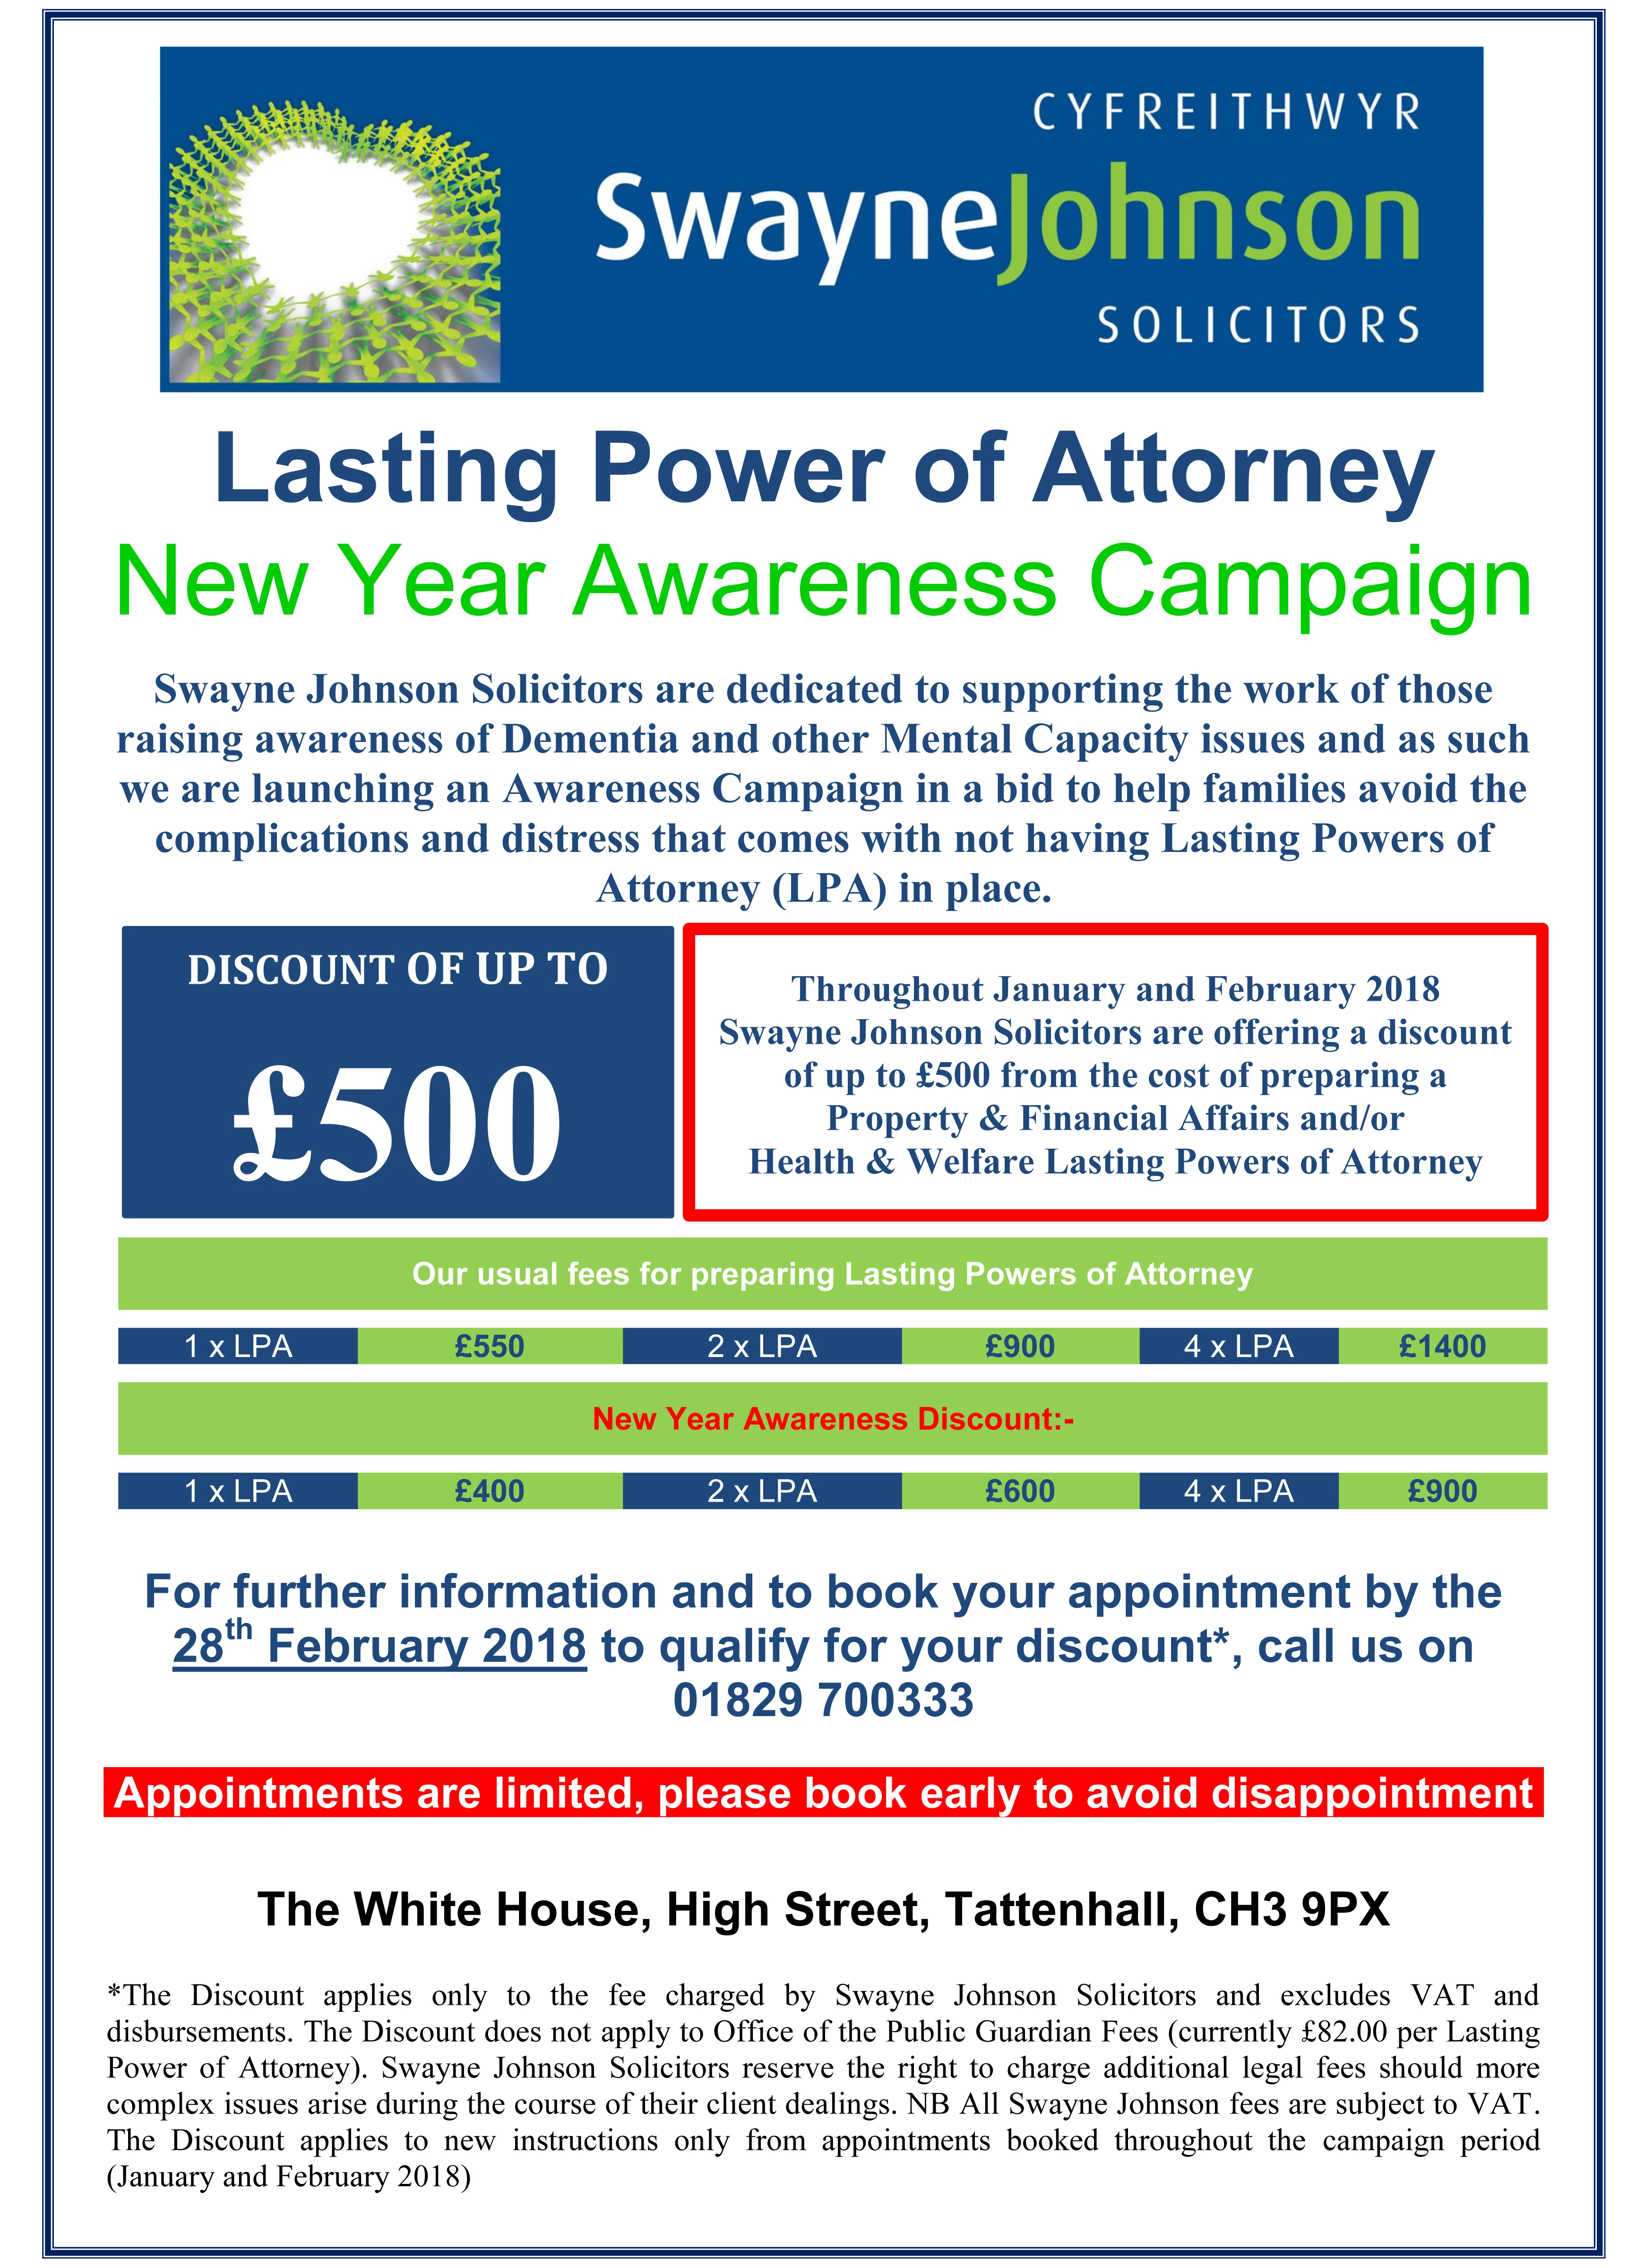 poster a4   lasting power of attorney  tattenhall  january 2018